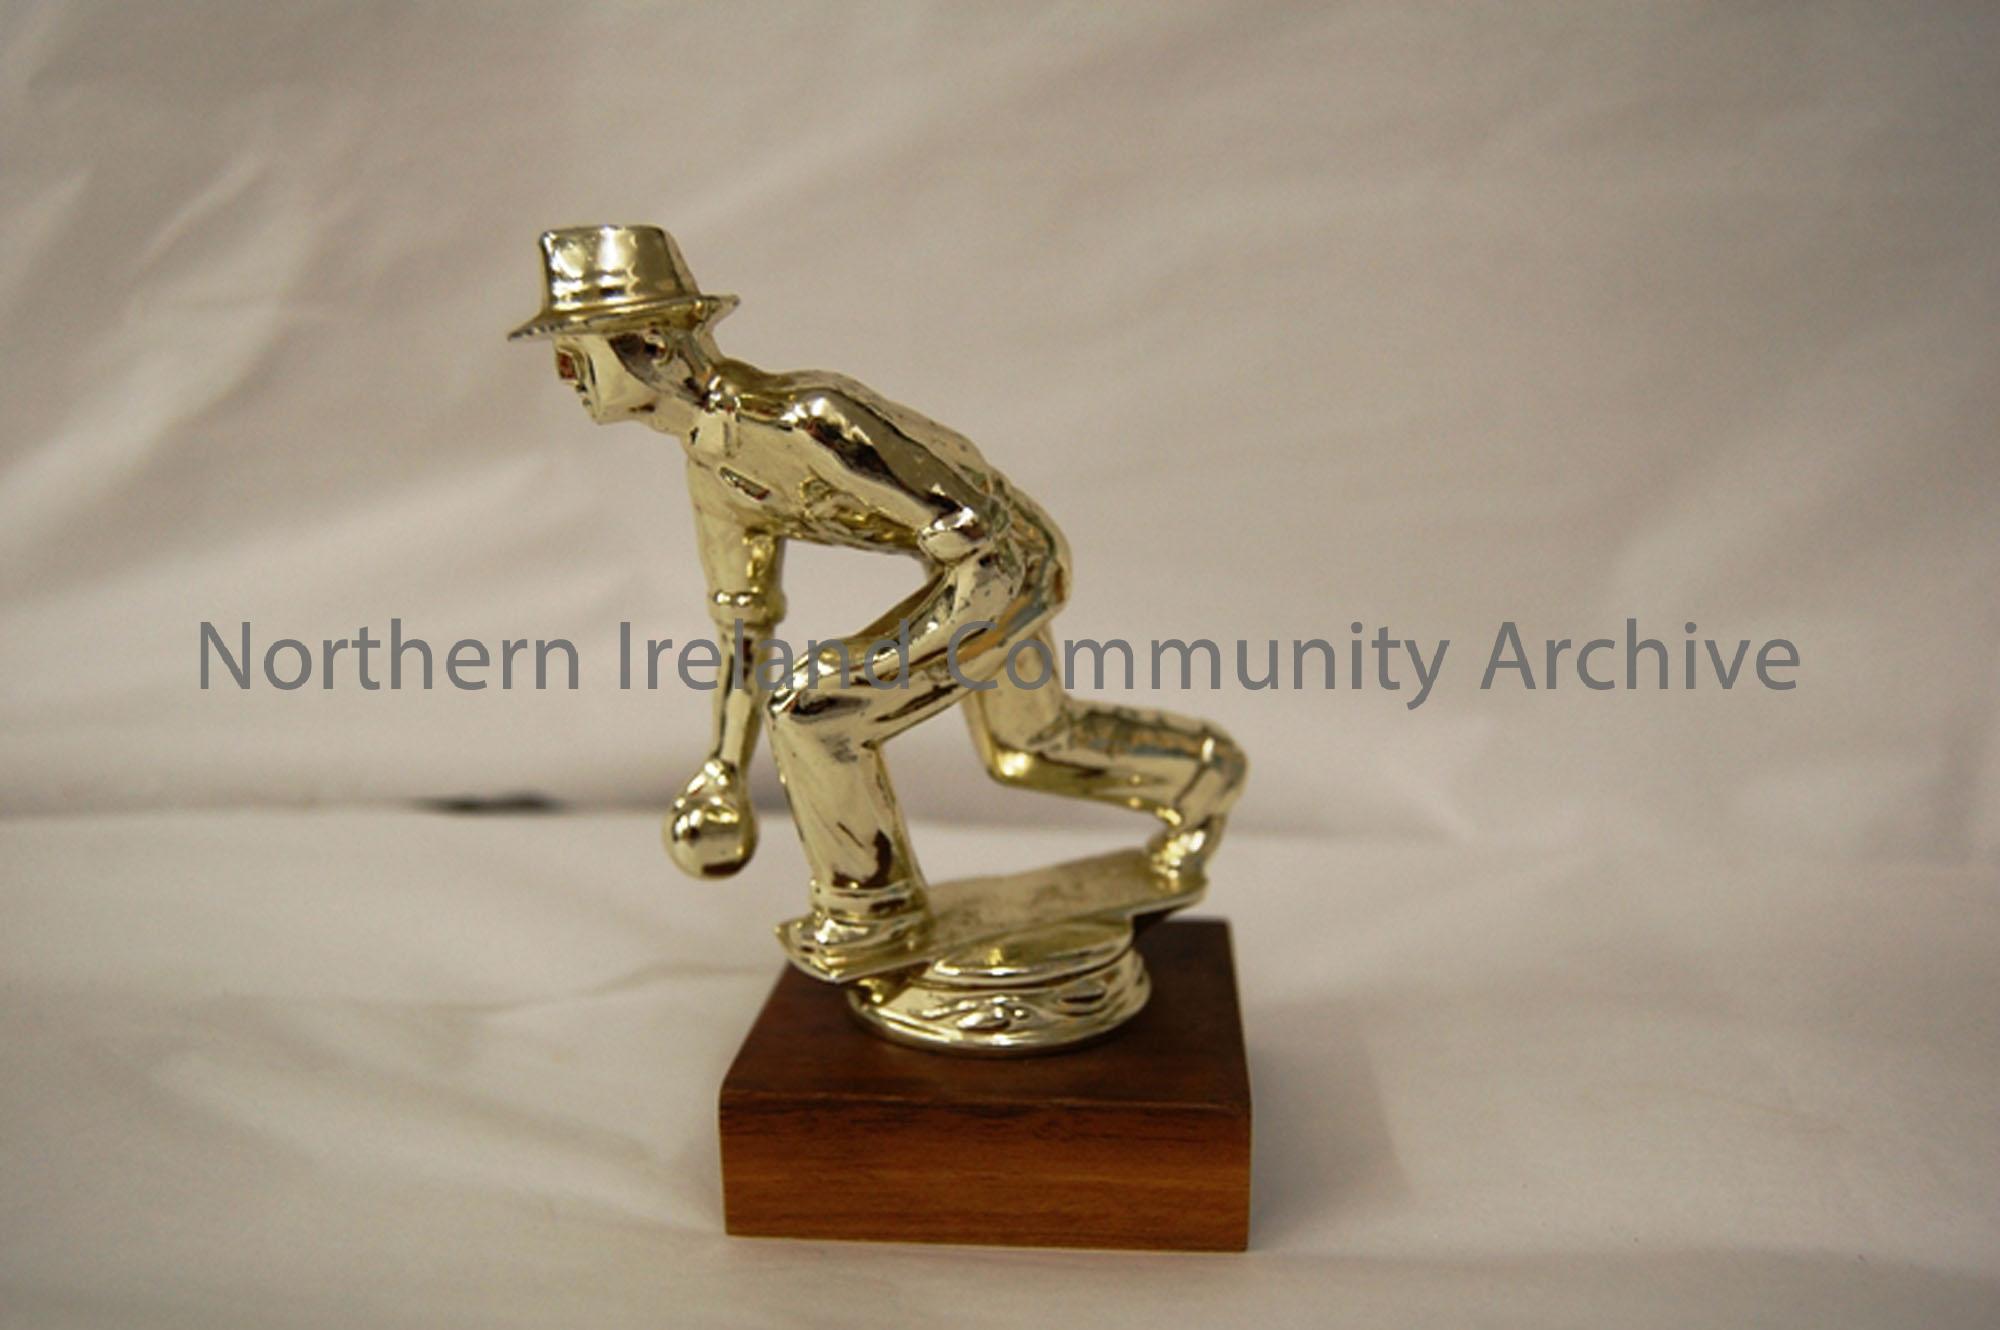 Bowling trophy- brass statue of a man bowling mounted on a wooden plinth